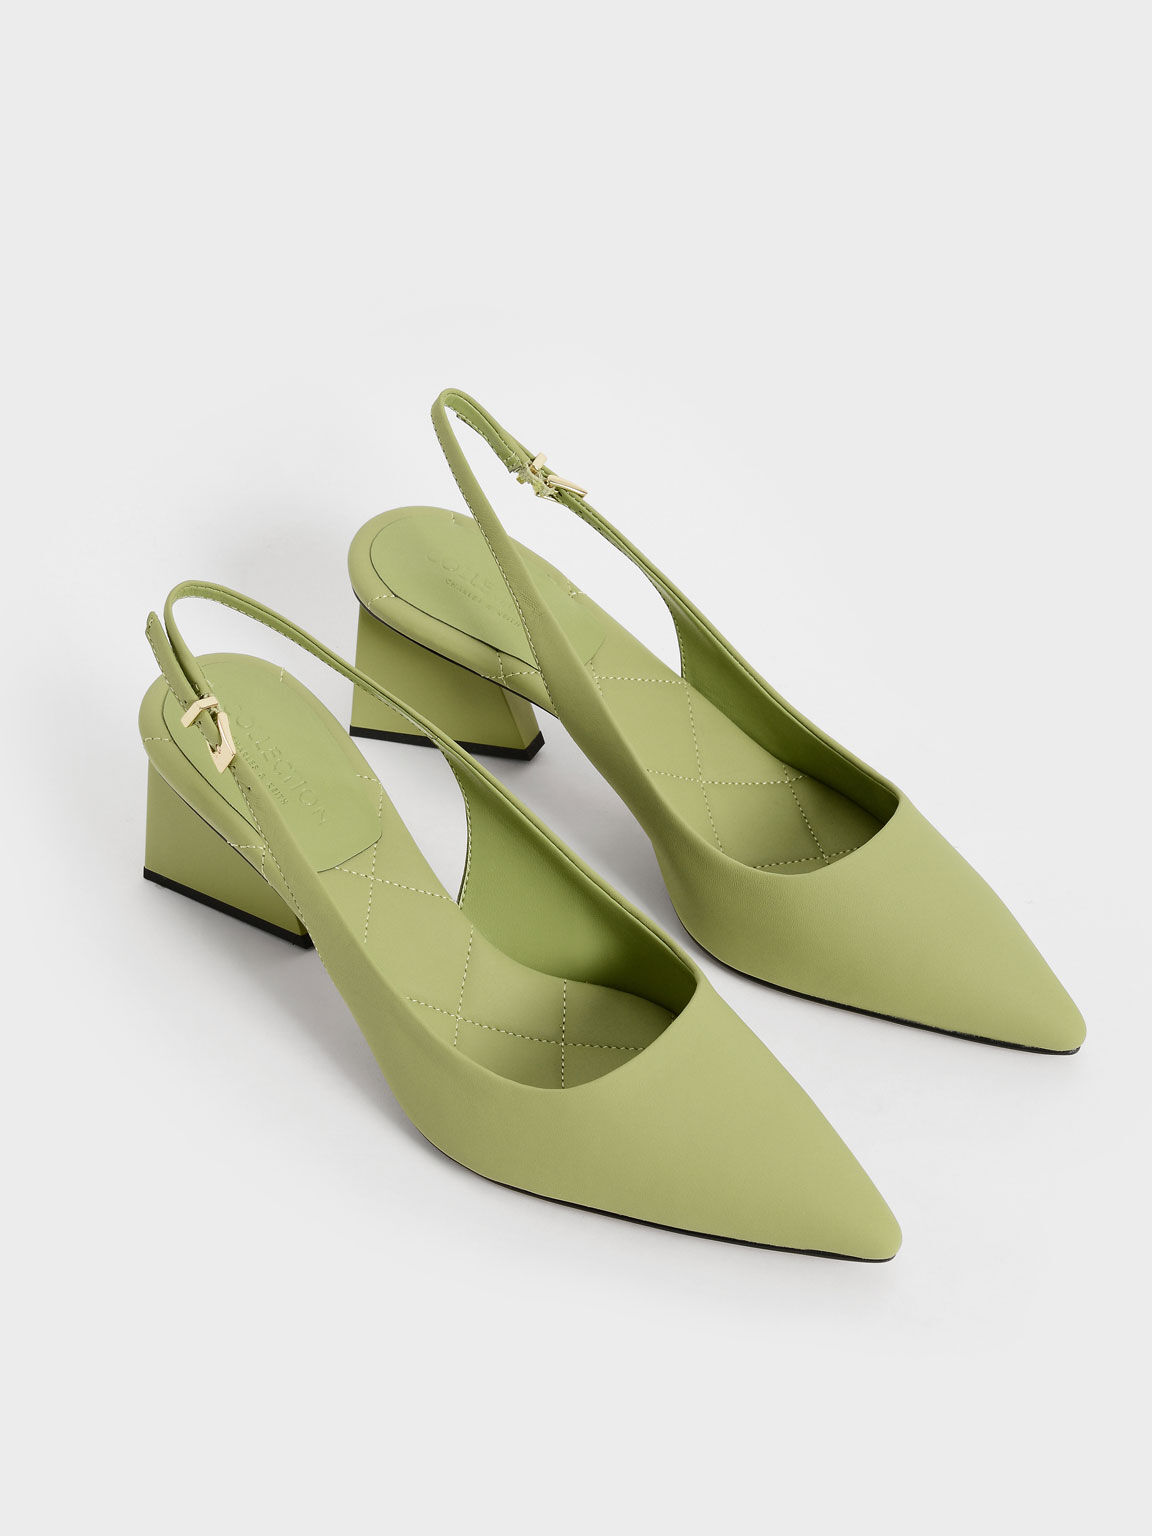 Leather Pointed Toe Slingback Pumps, Green, hi-res